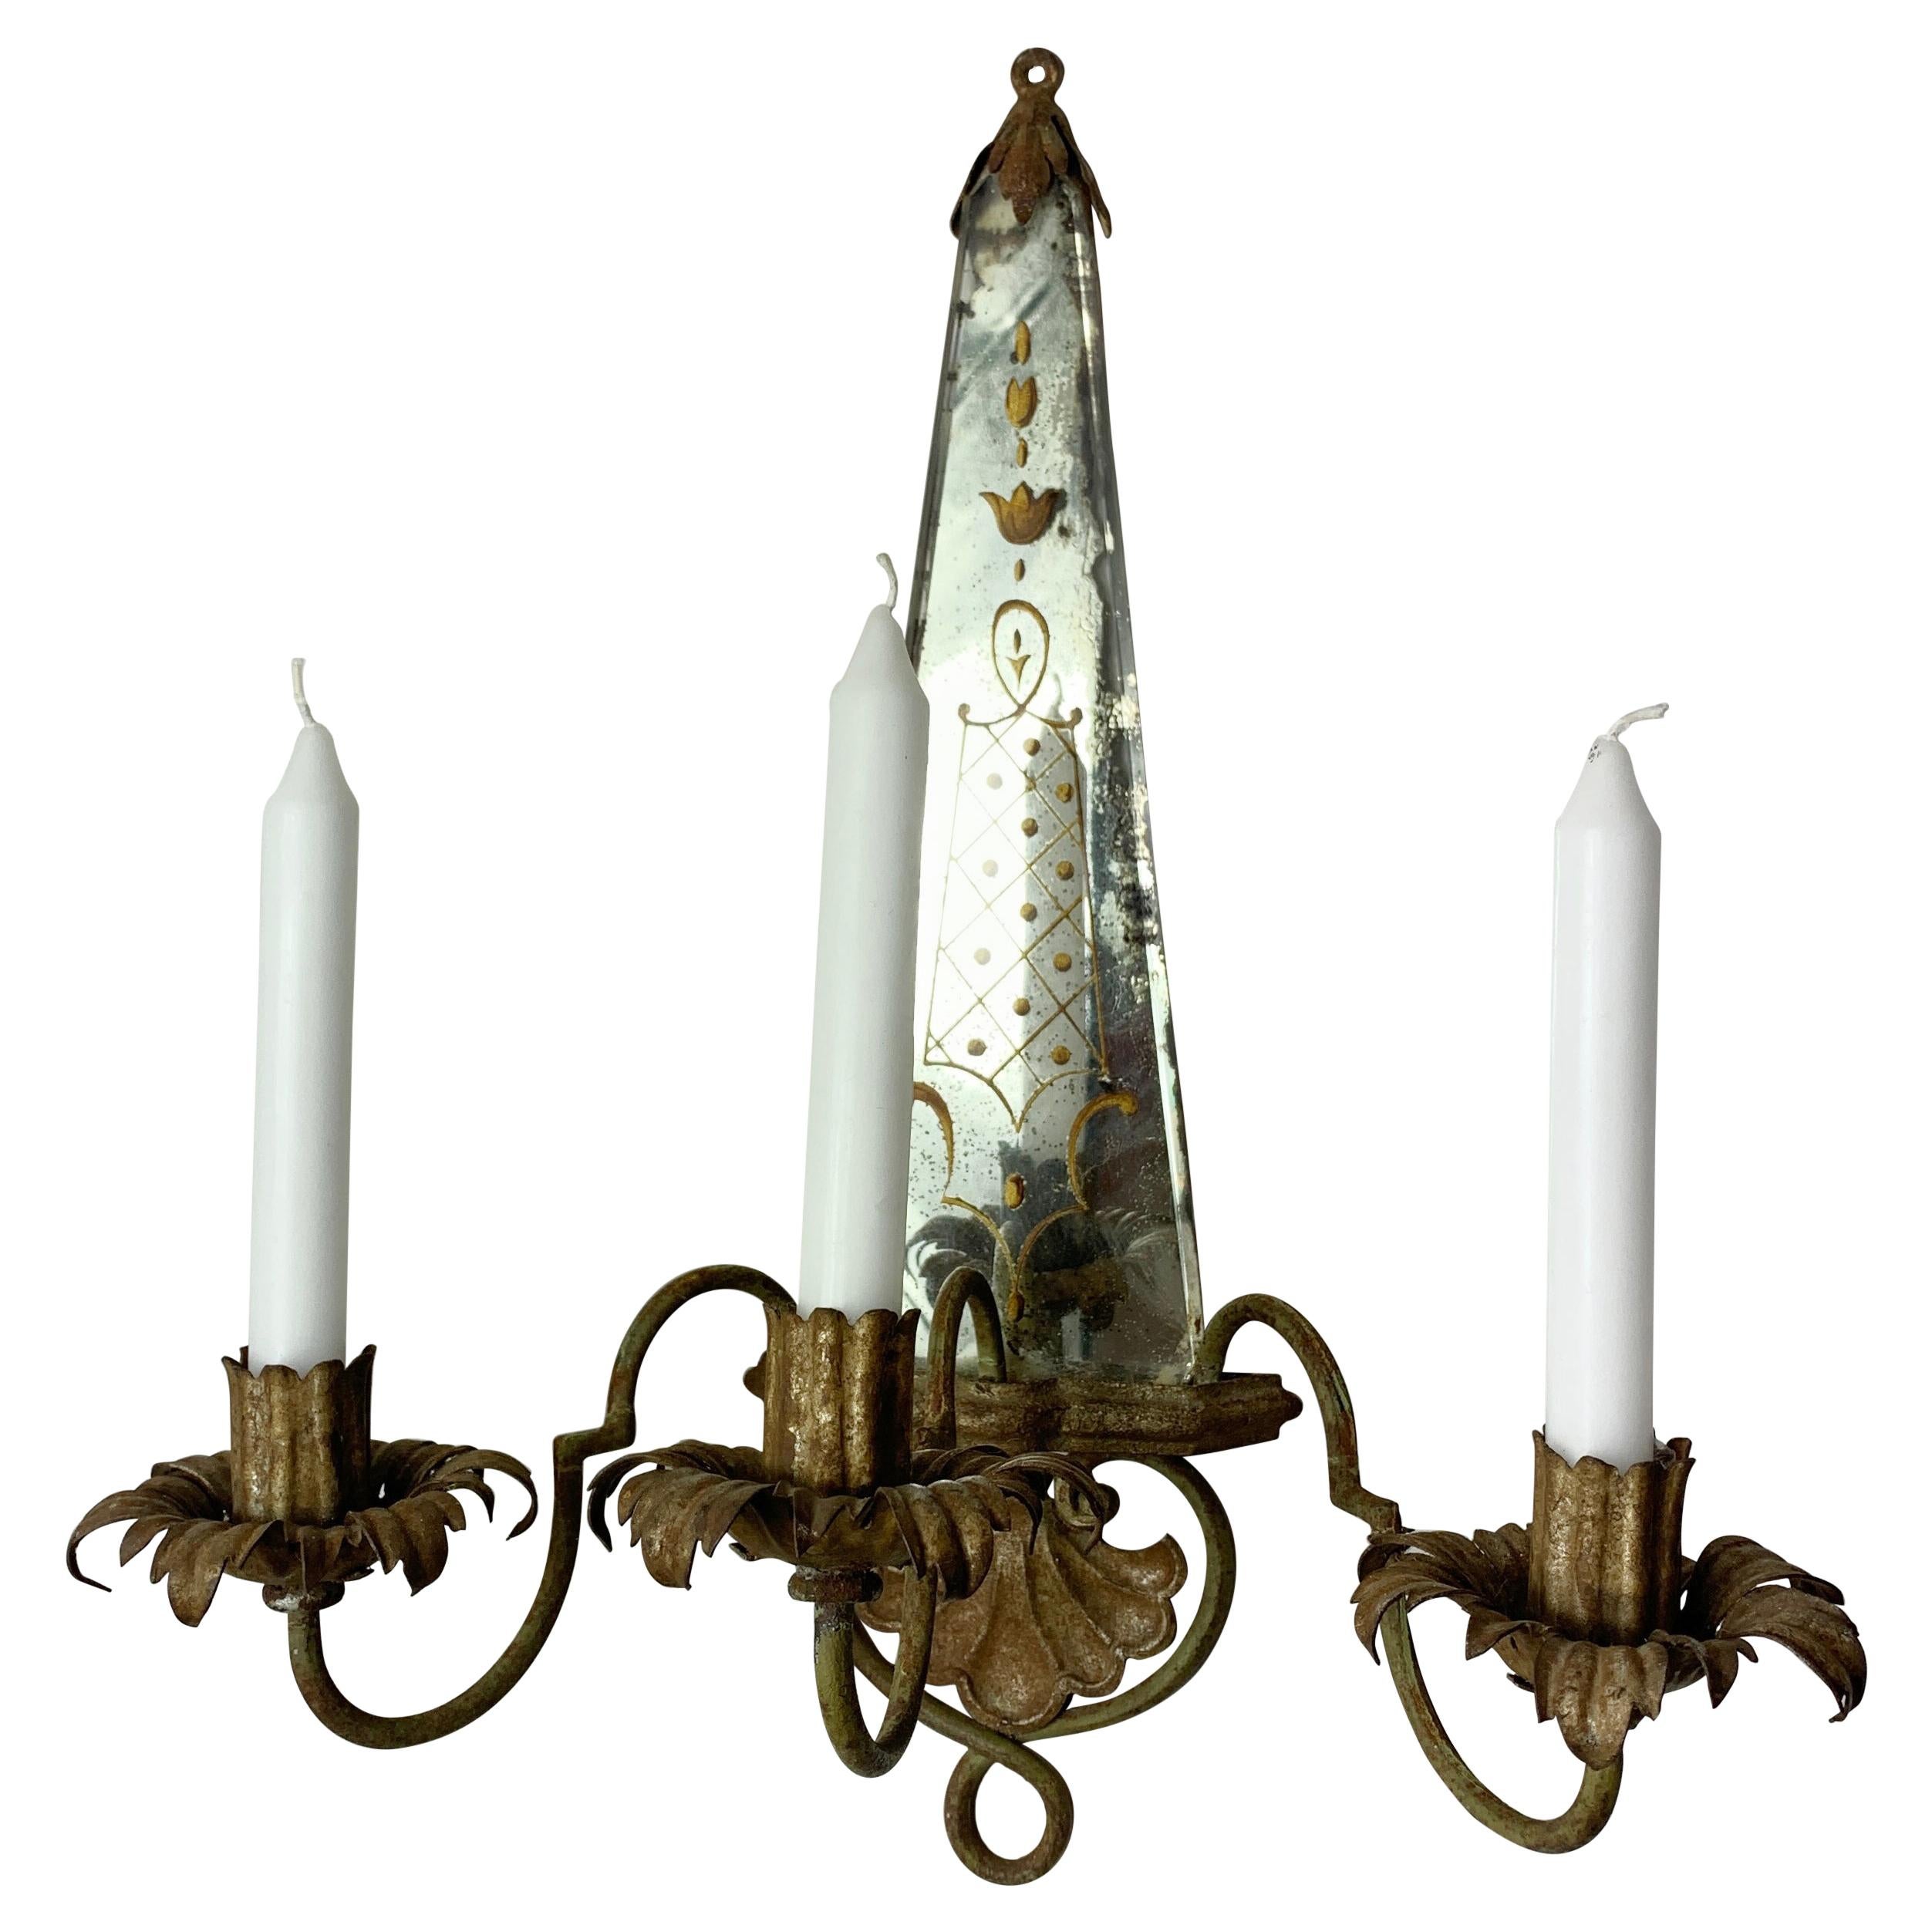 Early 20th Century French Mirrored Candle Sconce